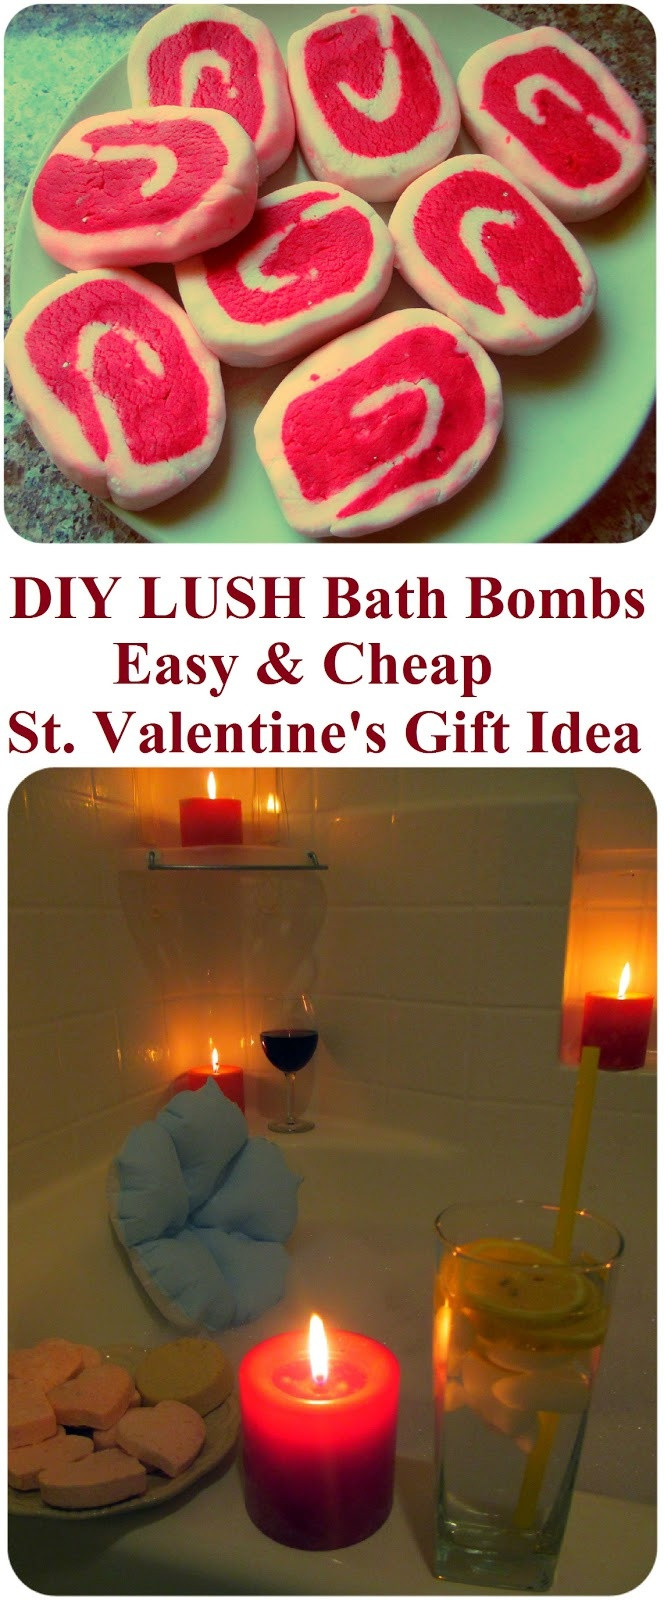 Saint Valentine Gift Ideas
 42 best images about Cheap Birthday Gift Ideas on